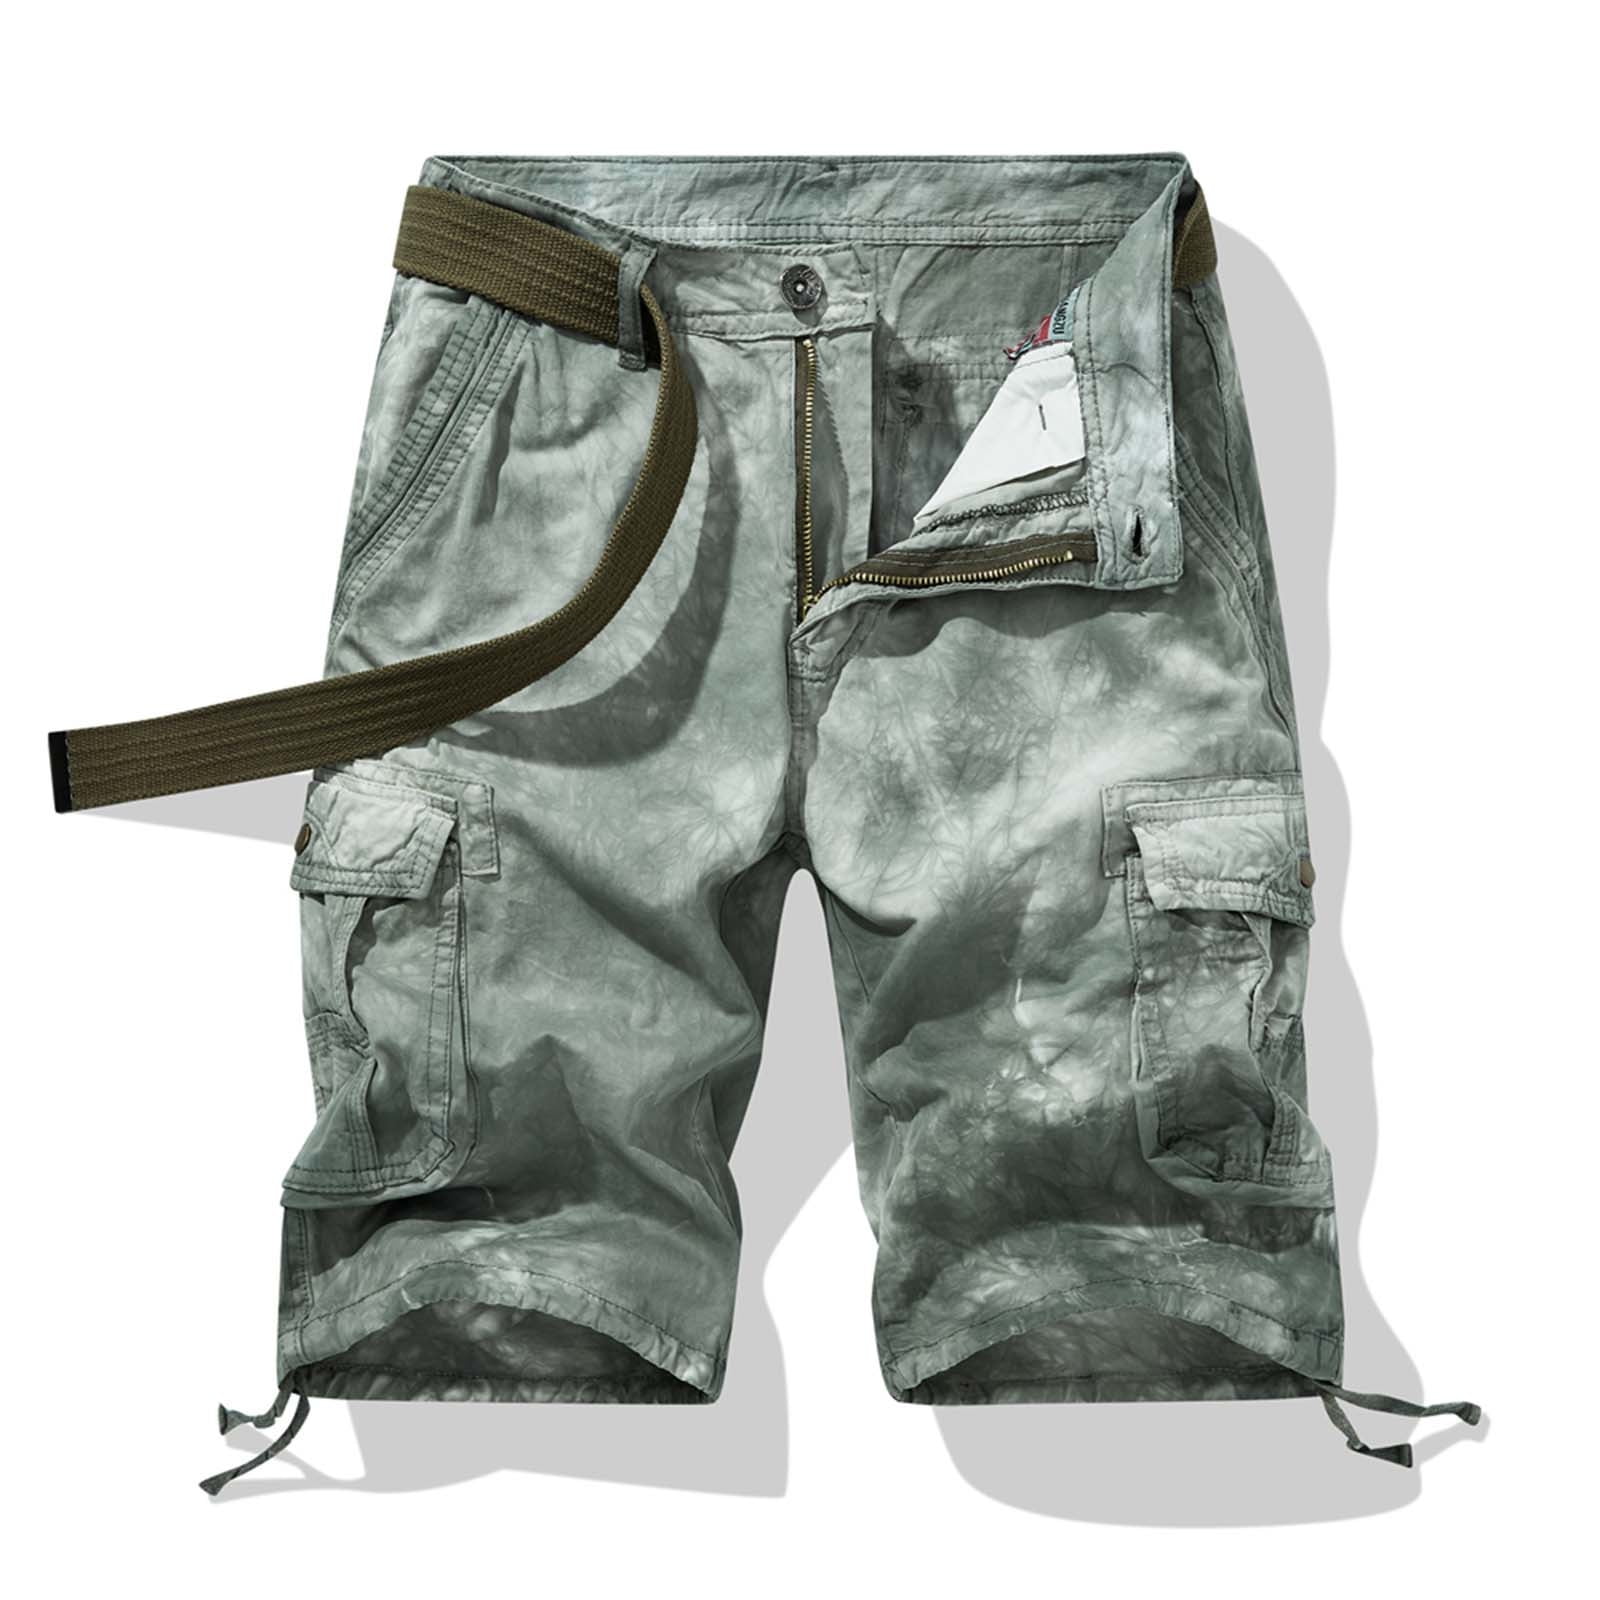 betaling nood knal symoid Mens Cargo Shorts Clearance- Beach Summer Plus Size with Pockets  Casual Hawaiian Army Green Shorts for Men Size XL - Walmart.com